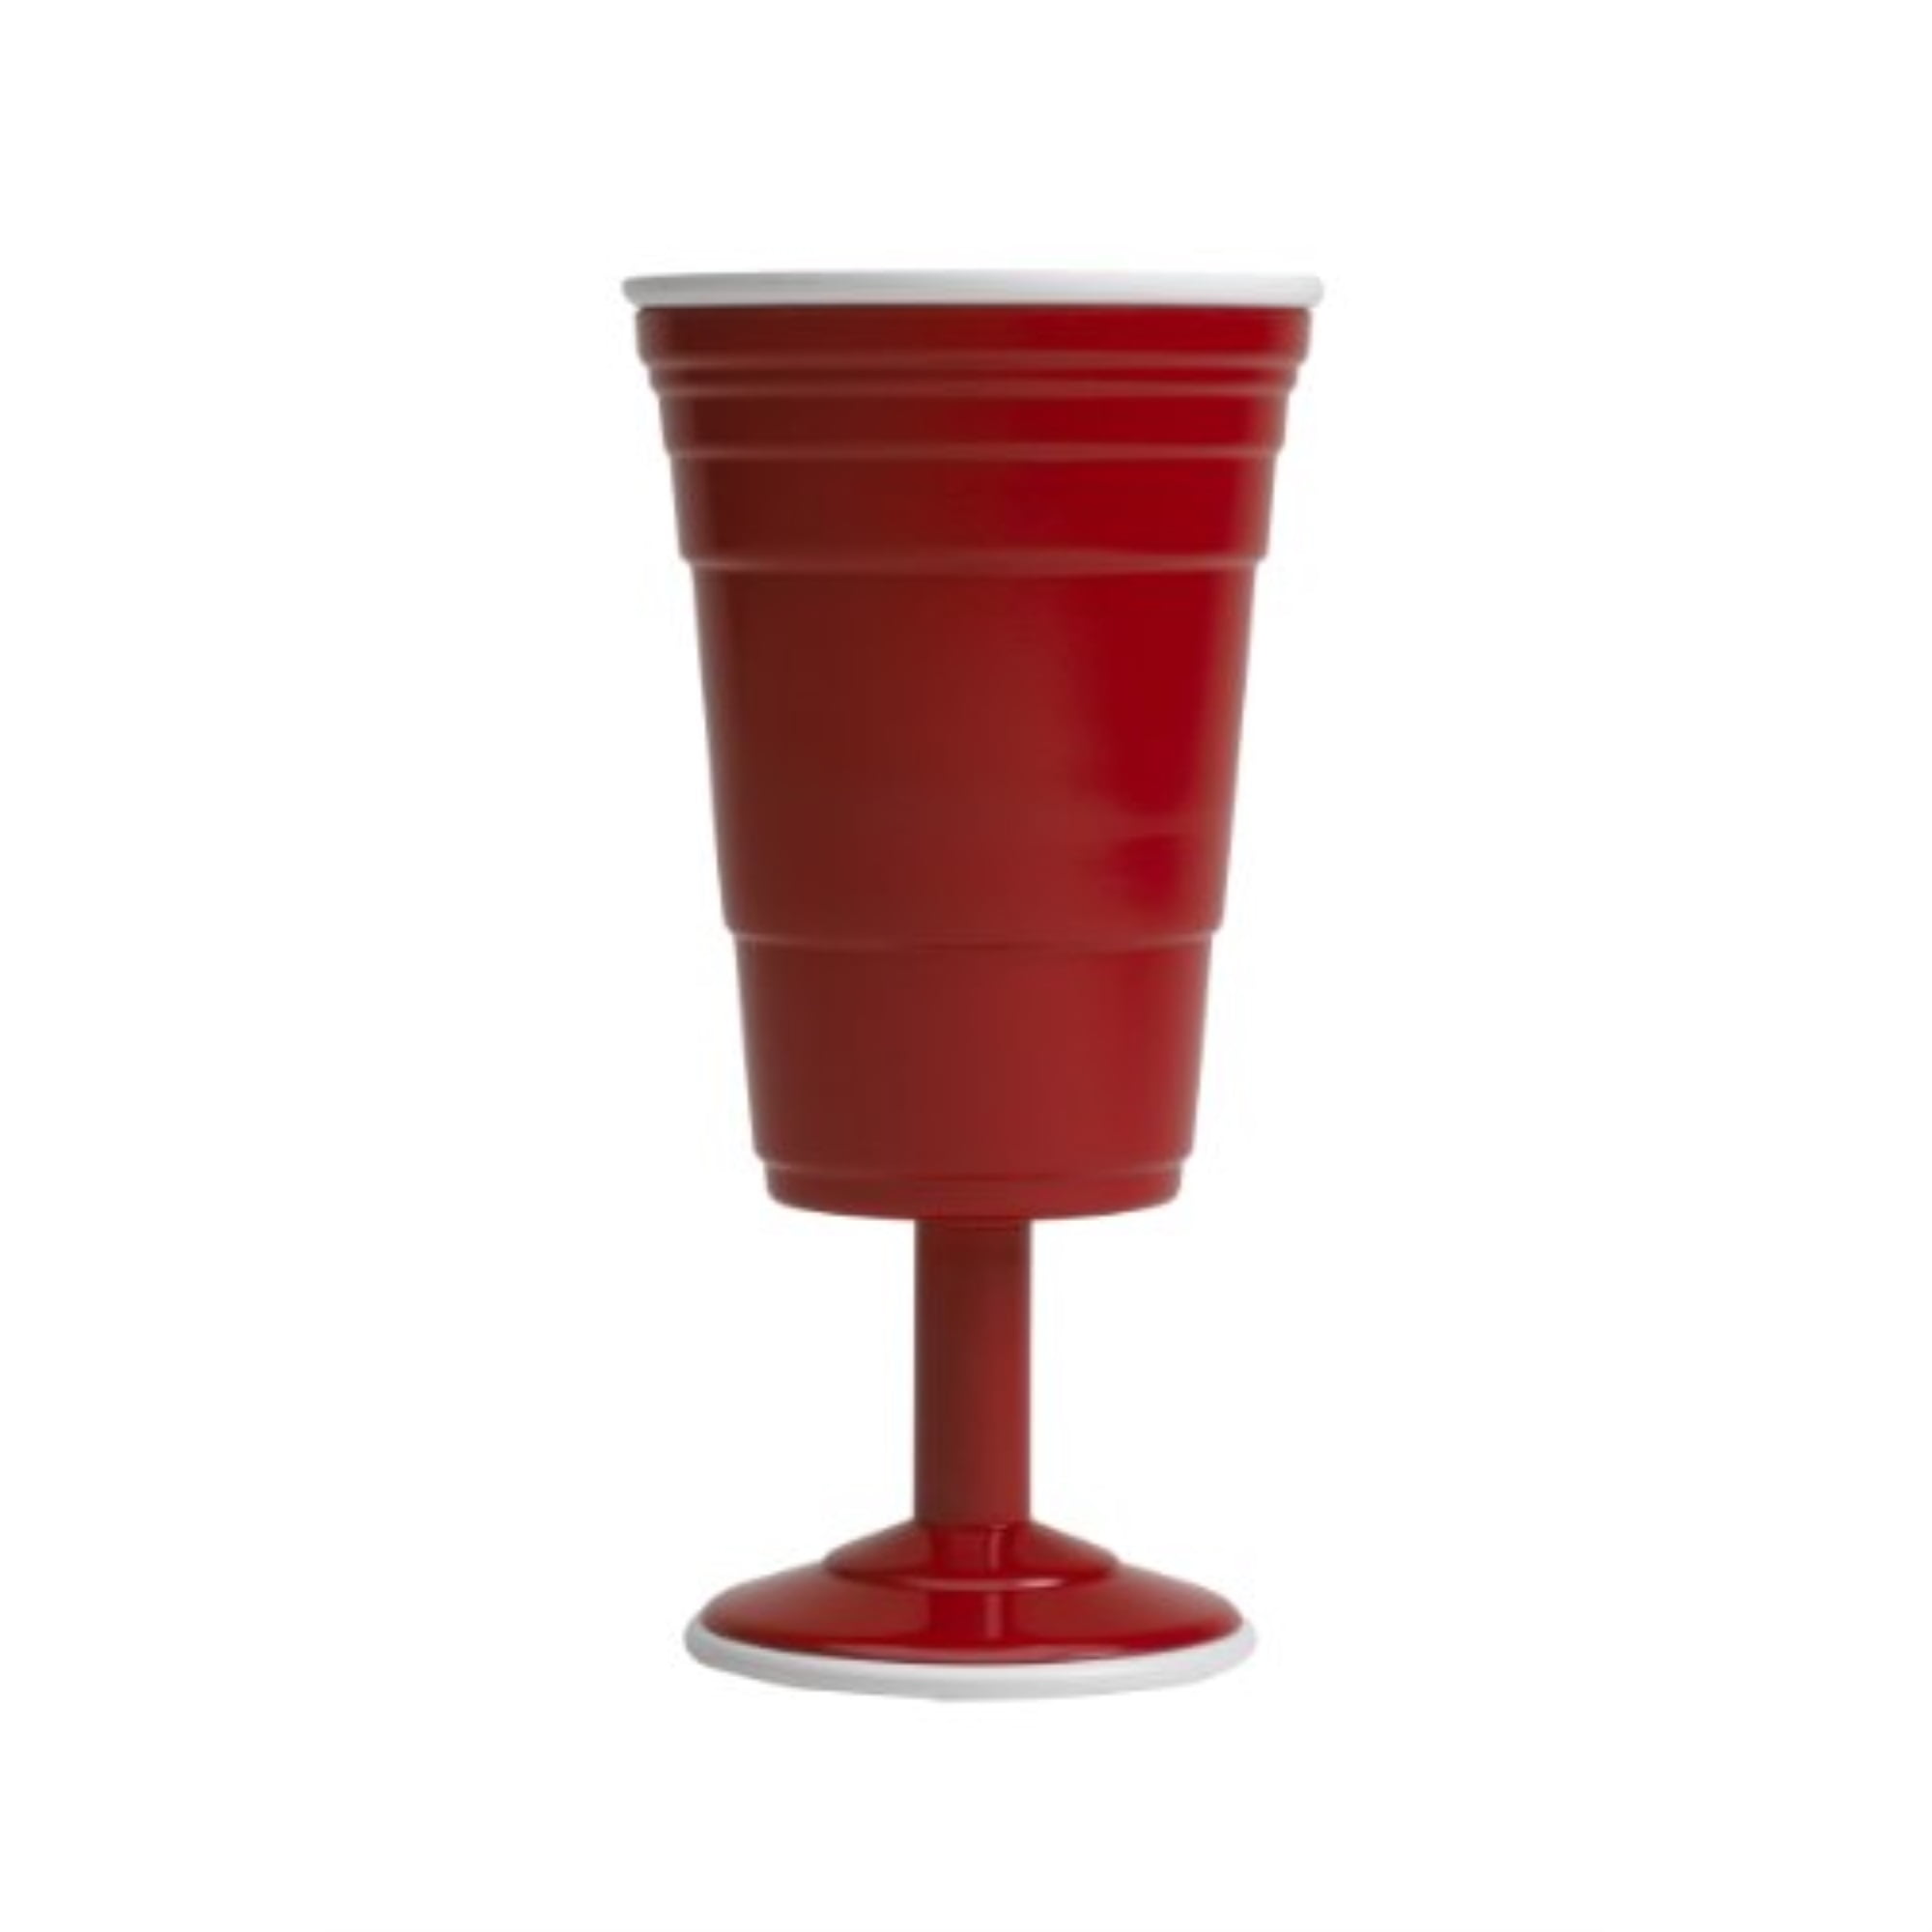 Solo Party Cup Party Cup 18OZ - Pour Vous Spirits, Wine & Beer,  Hendersonville, TN, Hendersonville, TN